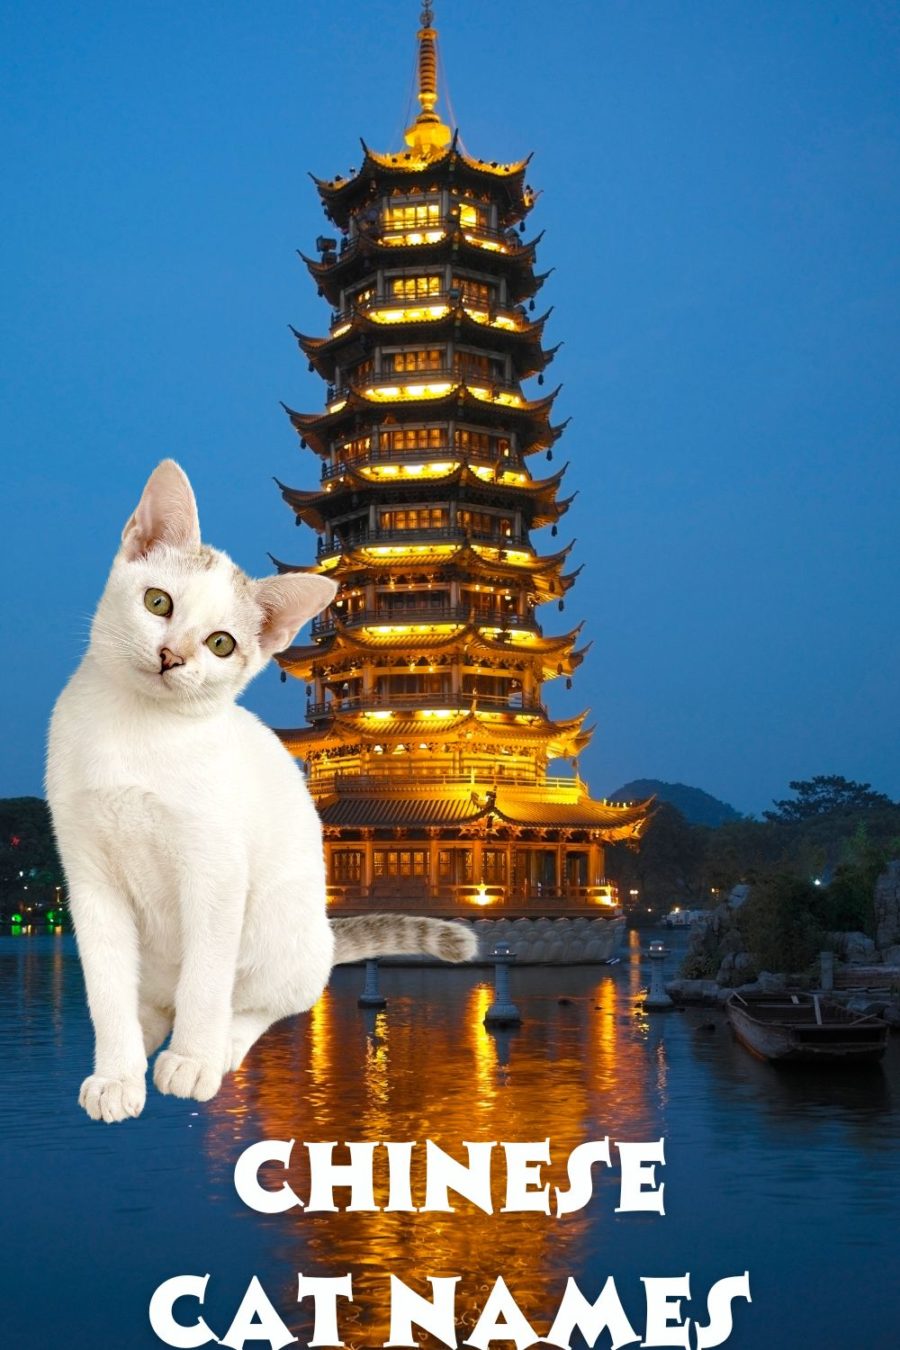 image of white cat in front of Chinese pagoda with words Chinese Cat Names on graphic